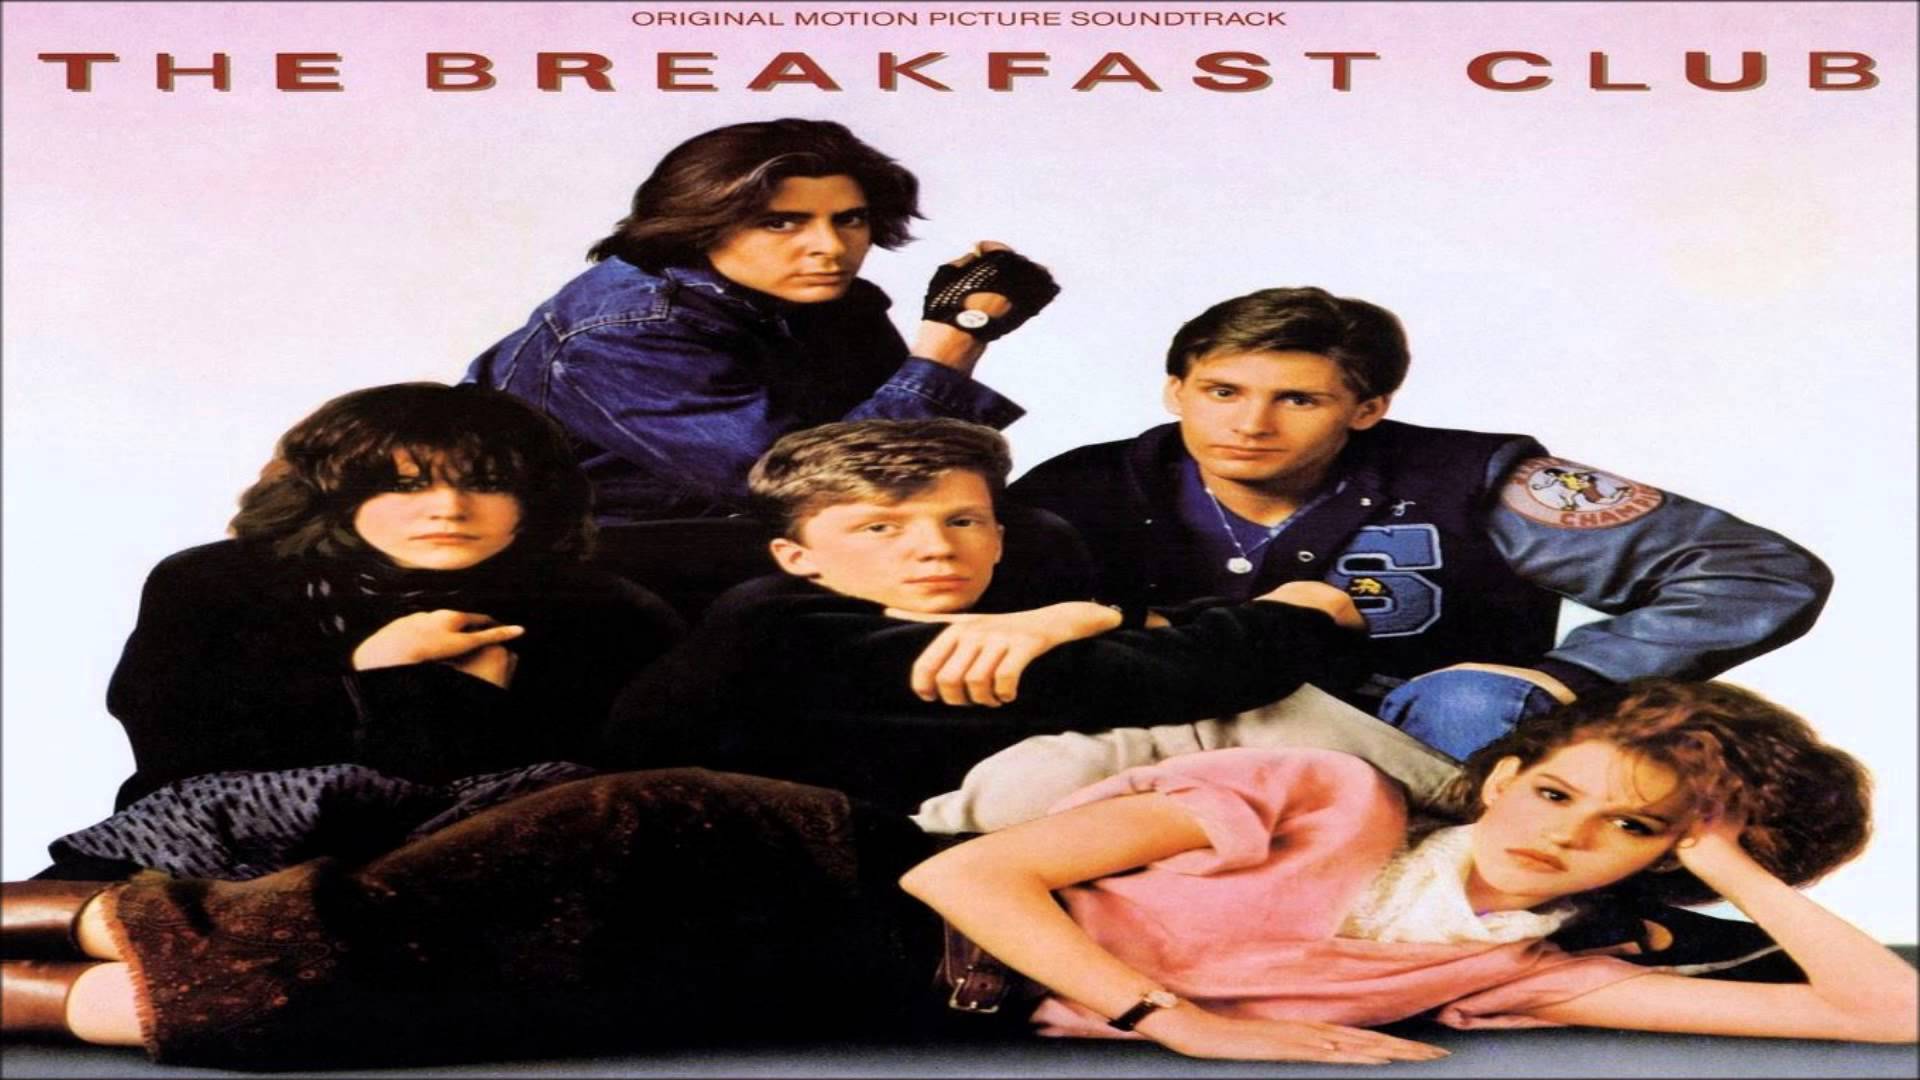 Simple Minds't You (Forget About Me) (The Breakfast Club